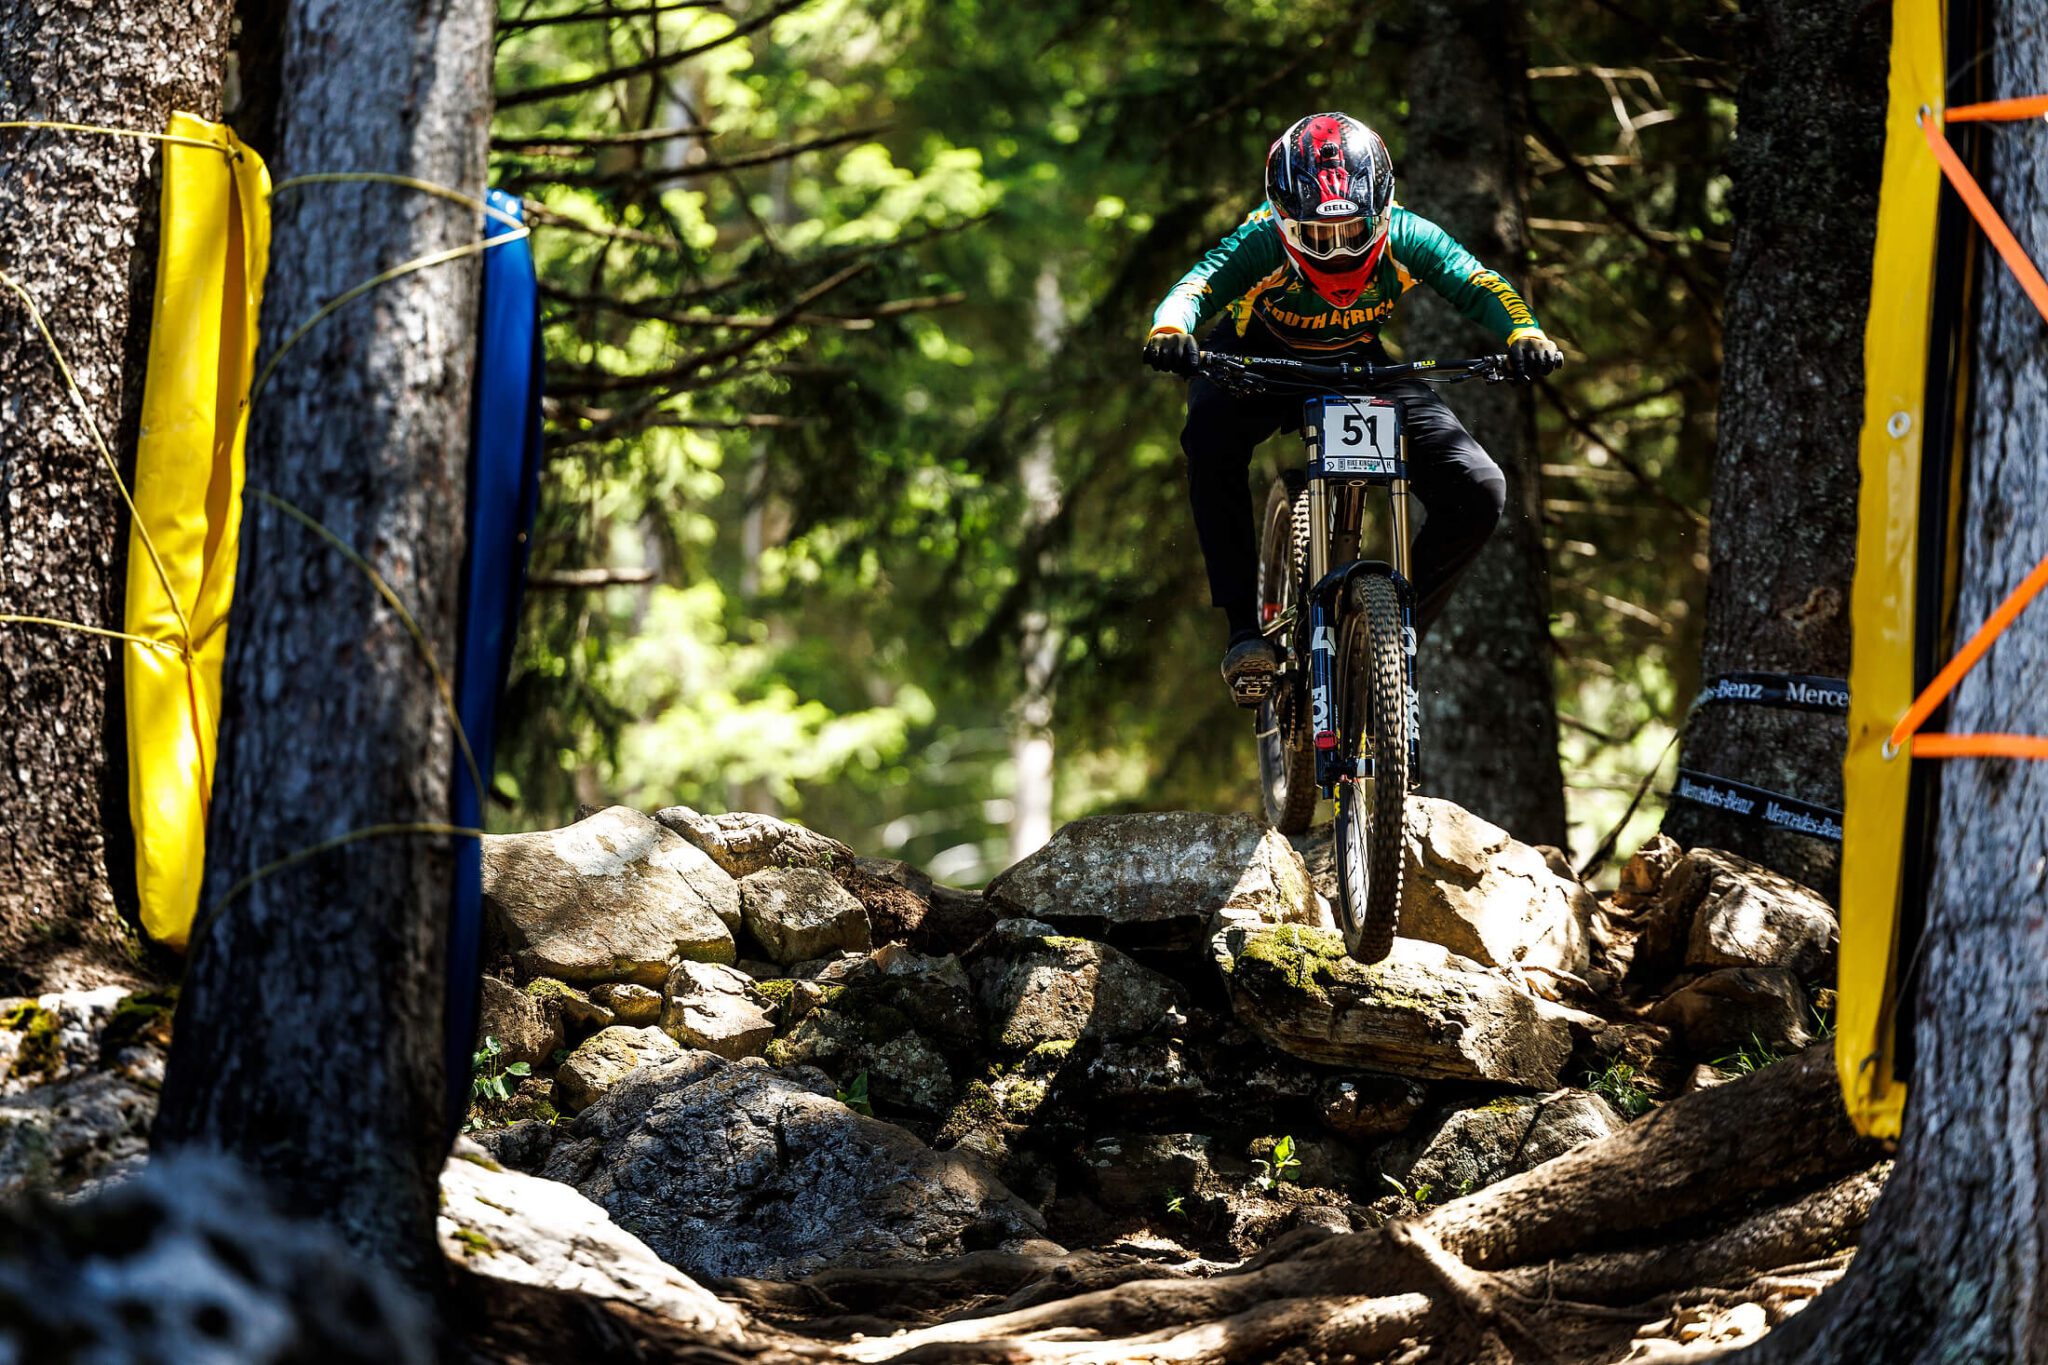 Taking On The World Cup Downhill Circuit With South African Privateer Chris Philogene